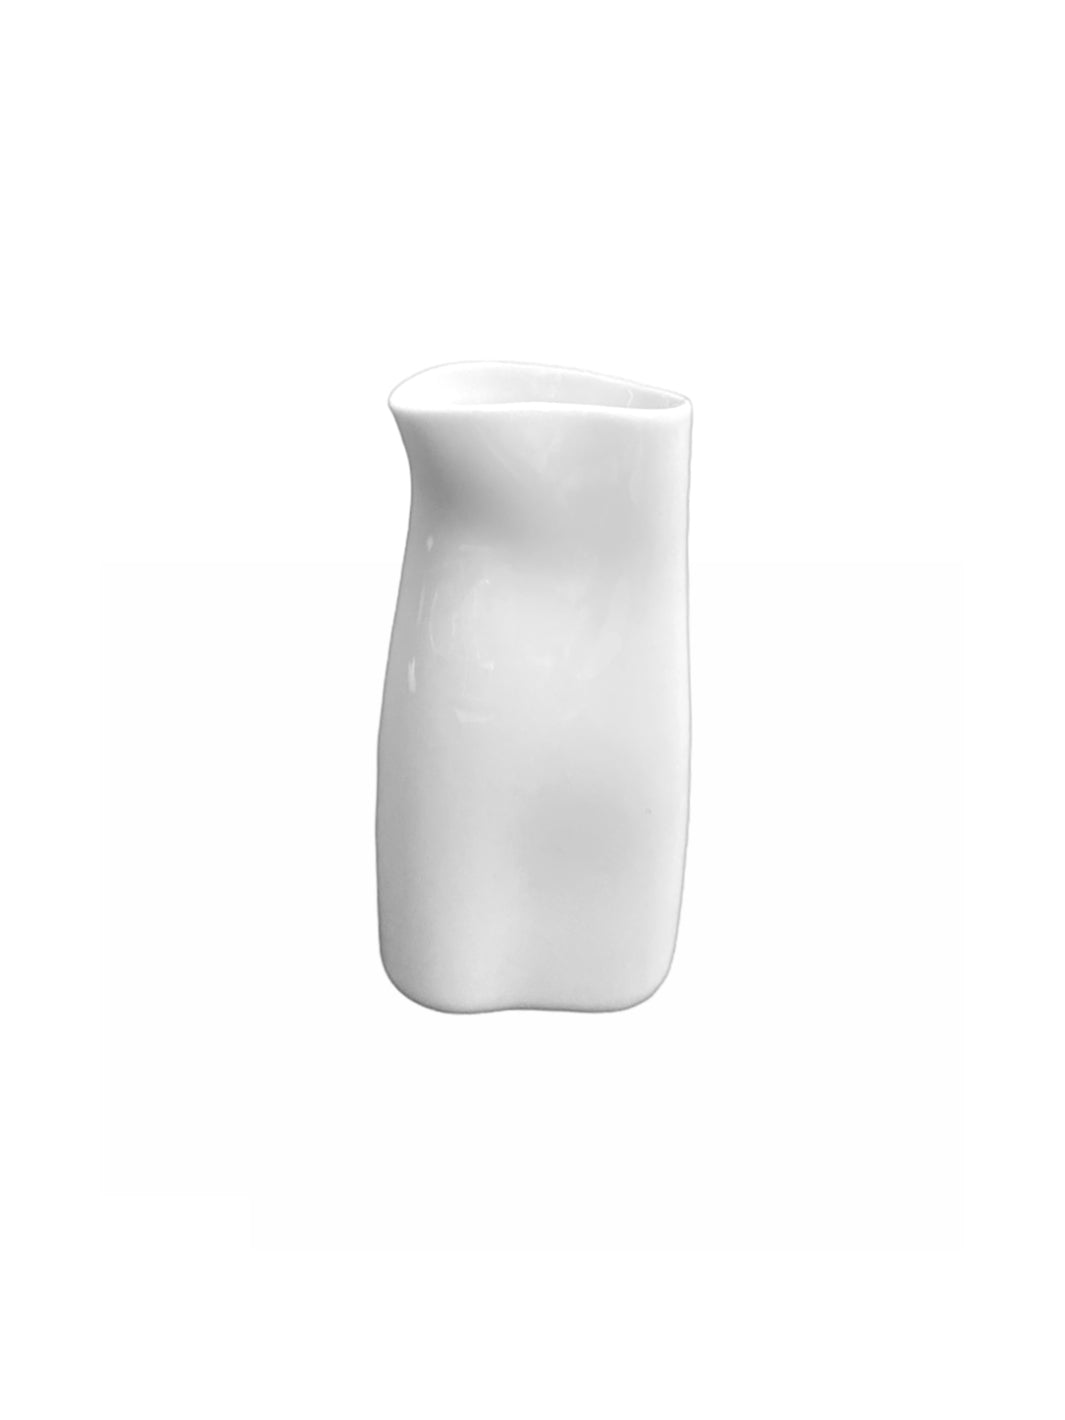 https://www.eightouncecoffsee.shop/wp-content/uploads/1700/76/find-your-cookplay-jelly-jar-server-vase-1000ml-34oz-cookplay-outlet-stores-now-and-shop_0.jpg